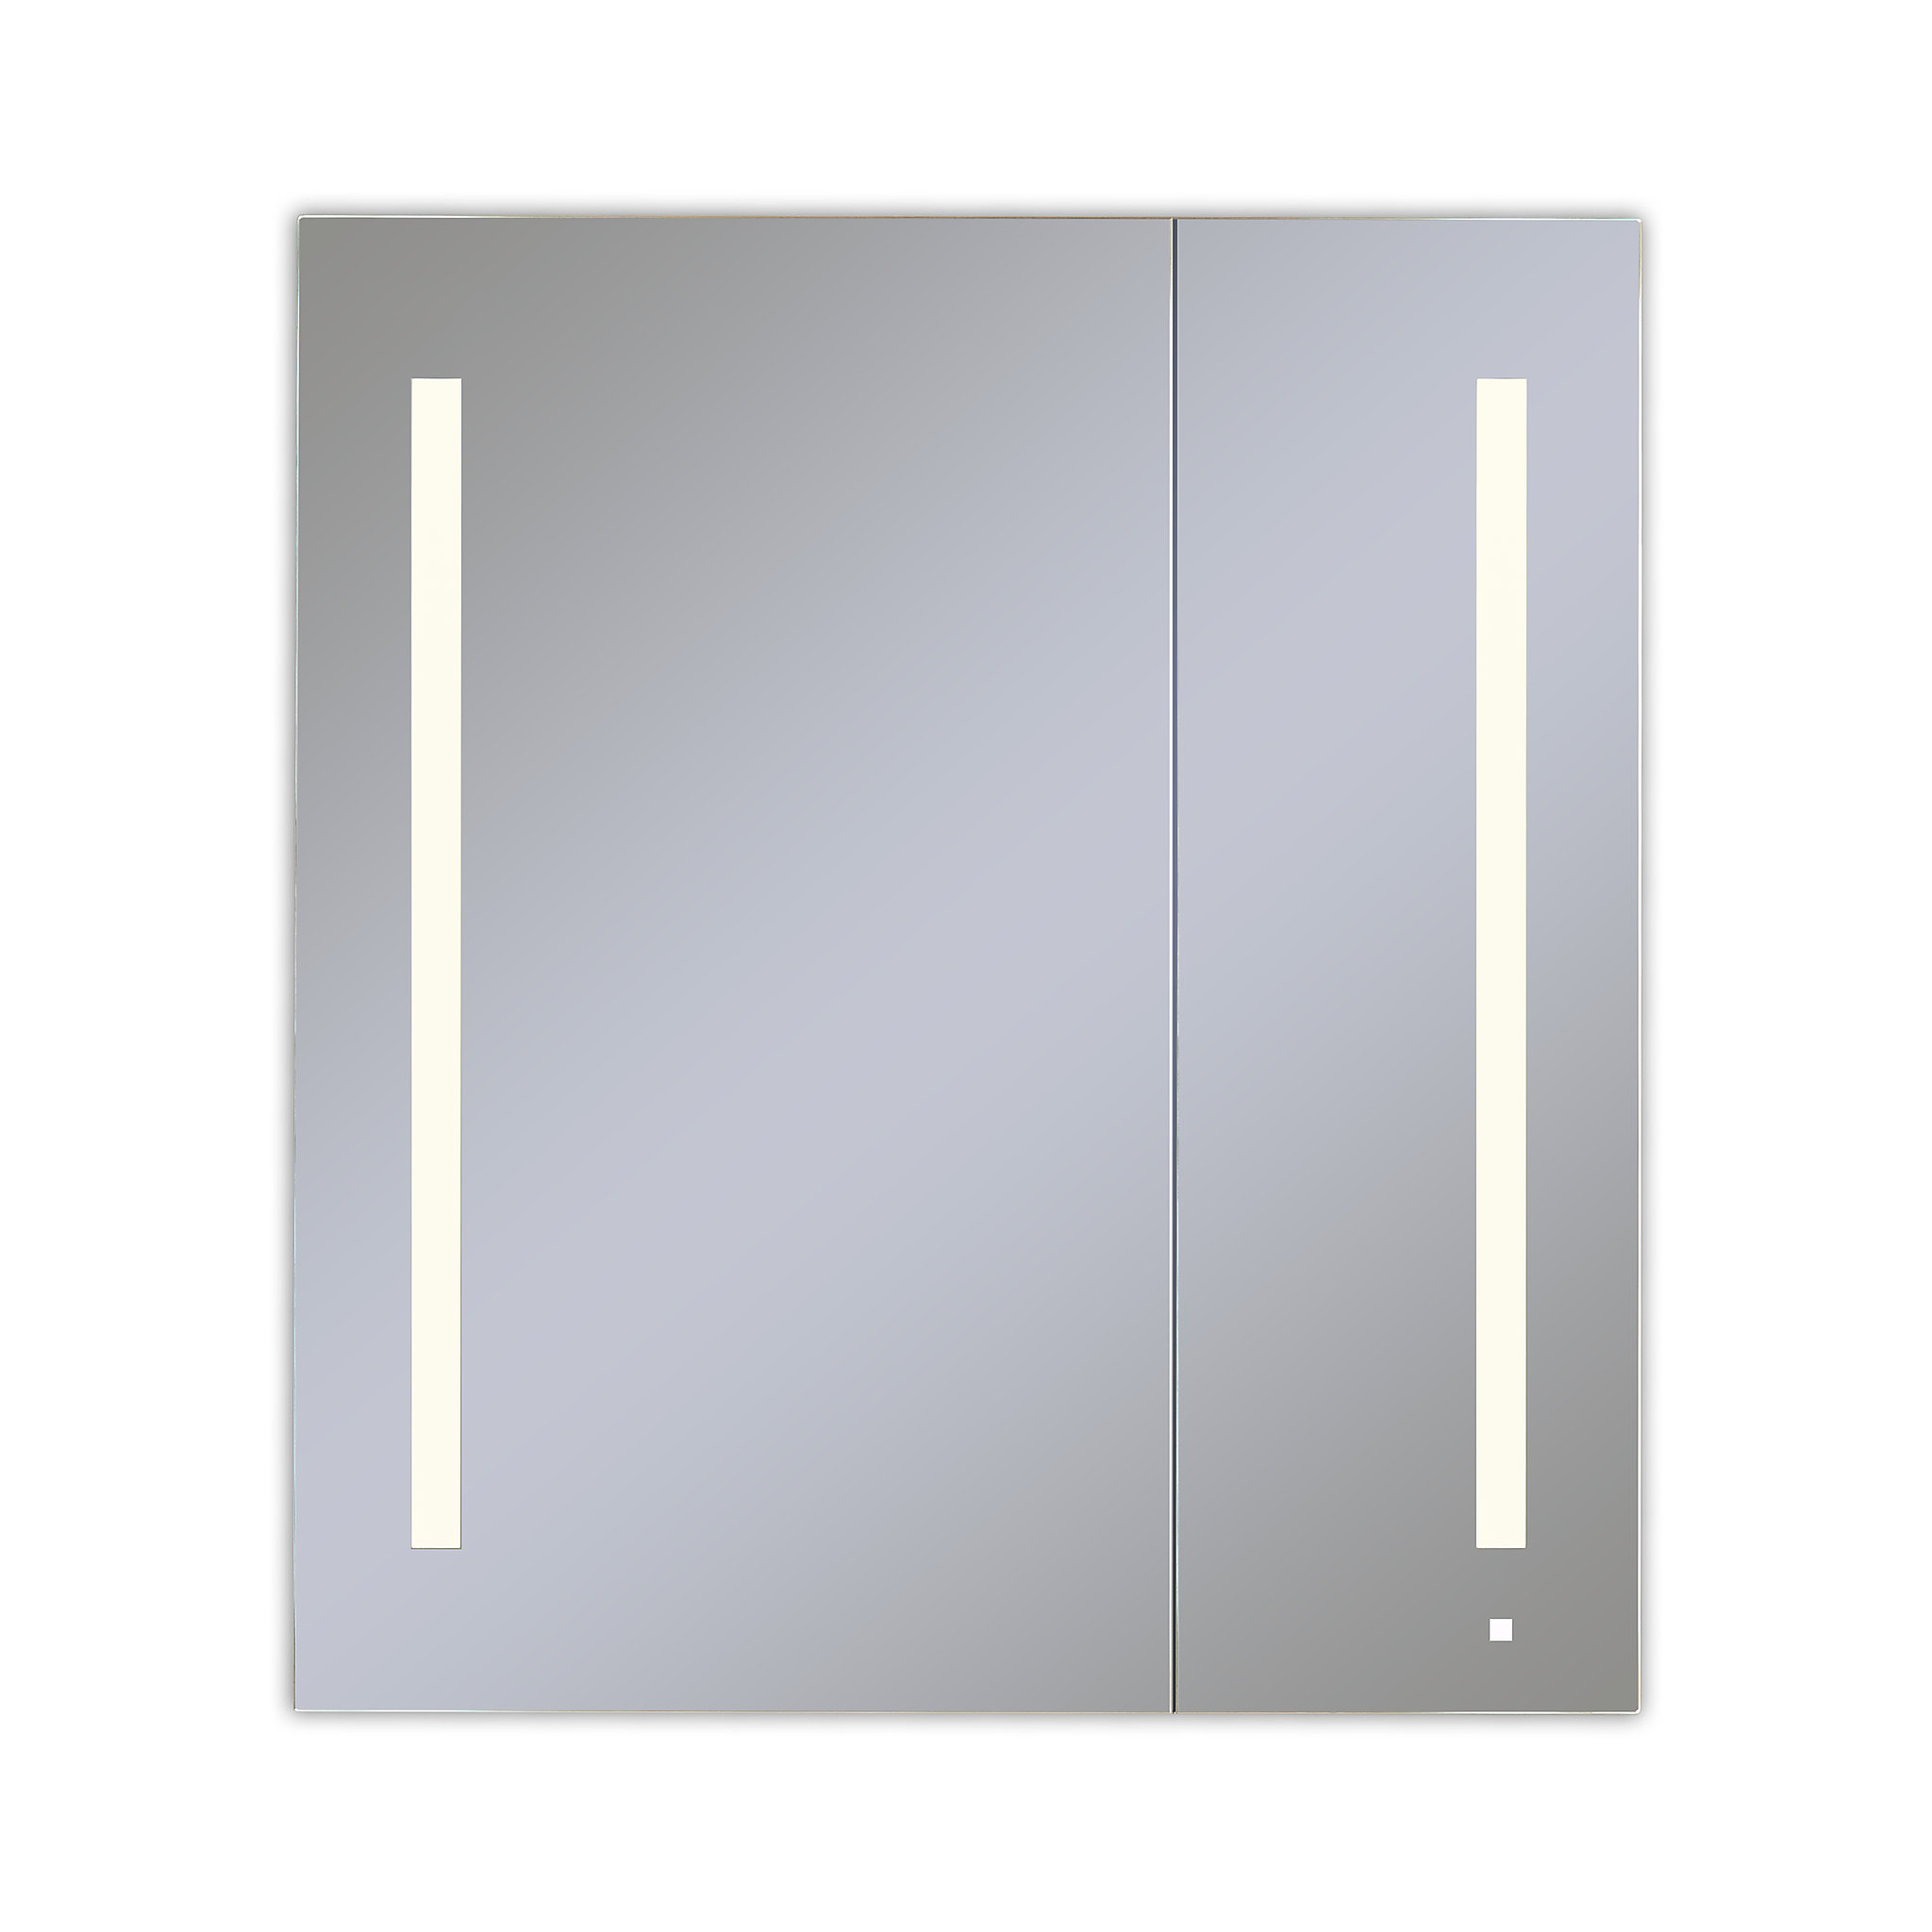 Robern AC3640D4P2LW AiO Lighted Cabinet, 36" x 40" x 4", Two Door, LUM Lighting, 2700K Temperature (Warm Light), Dimmable, Elect